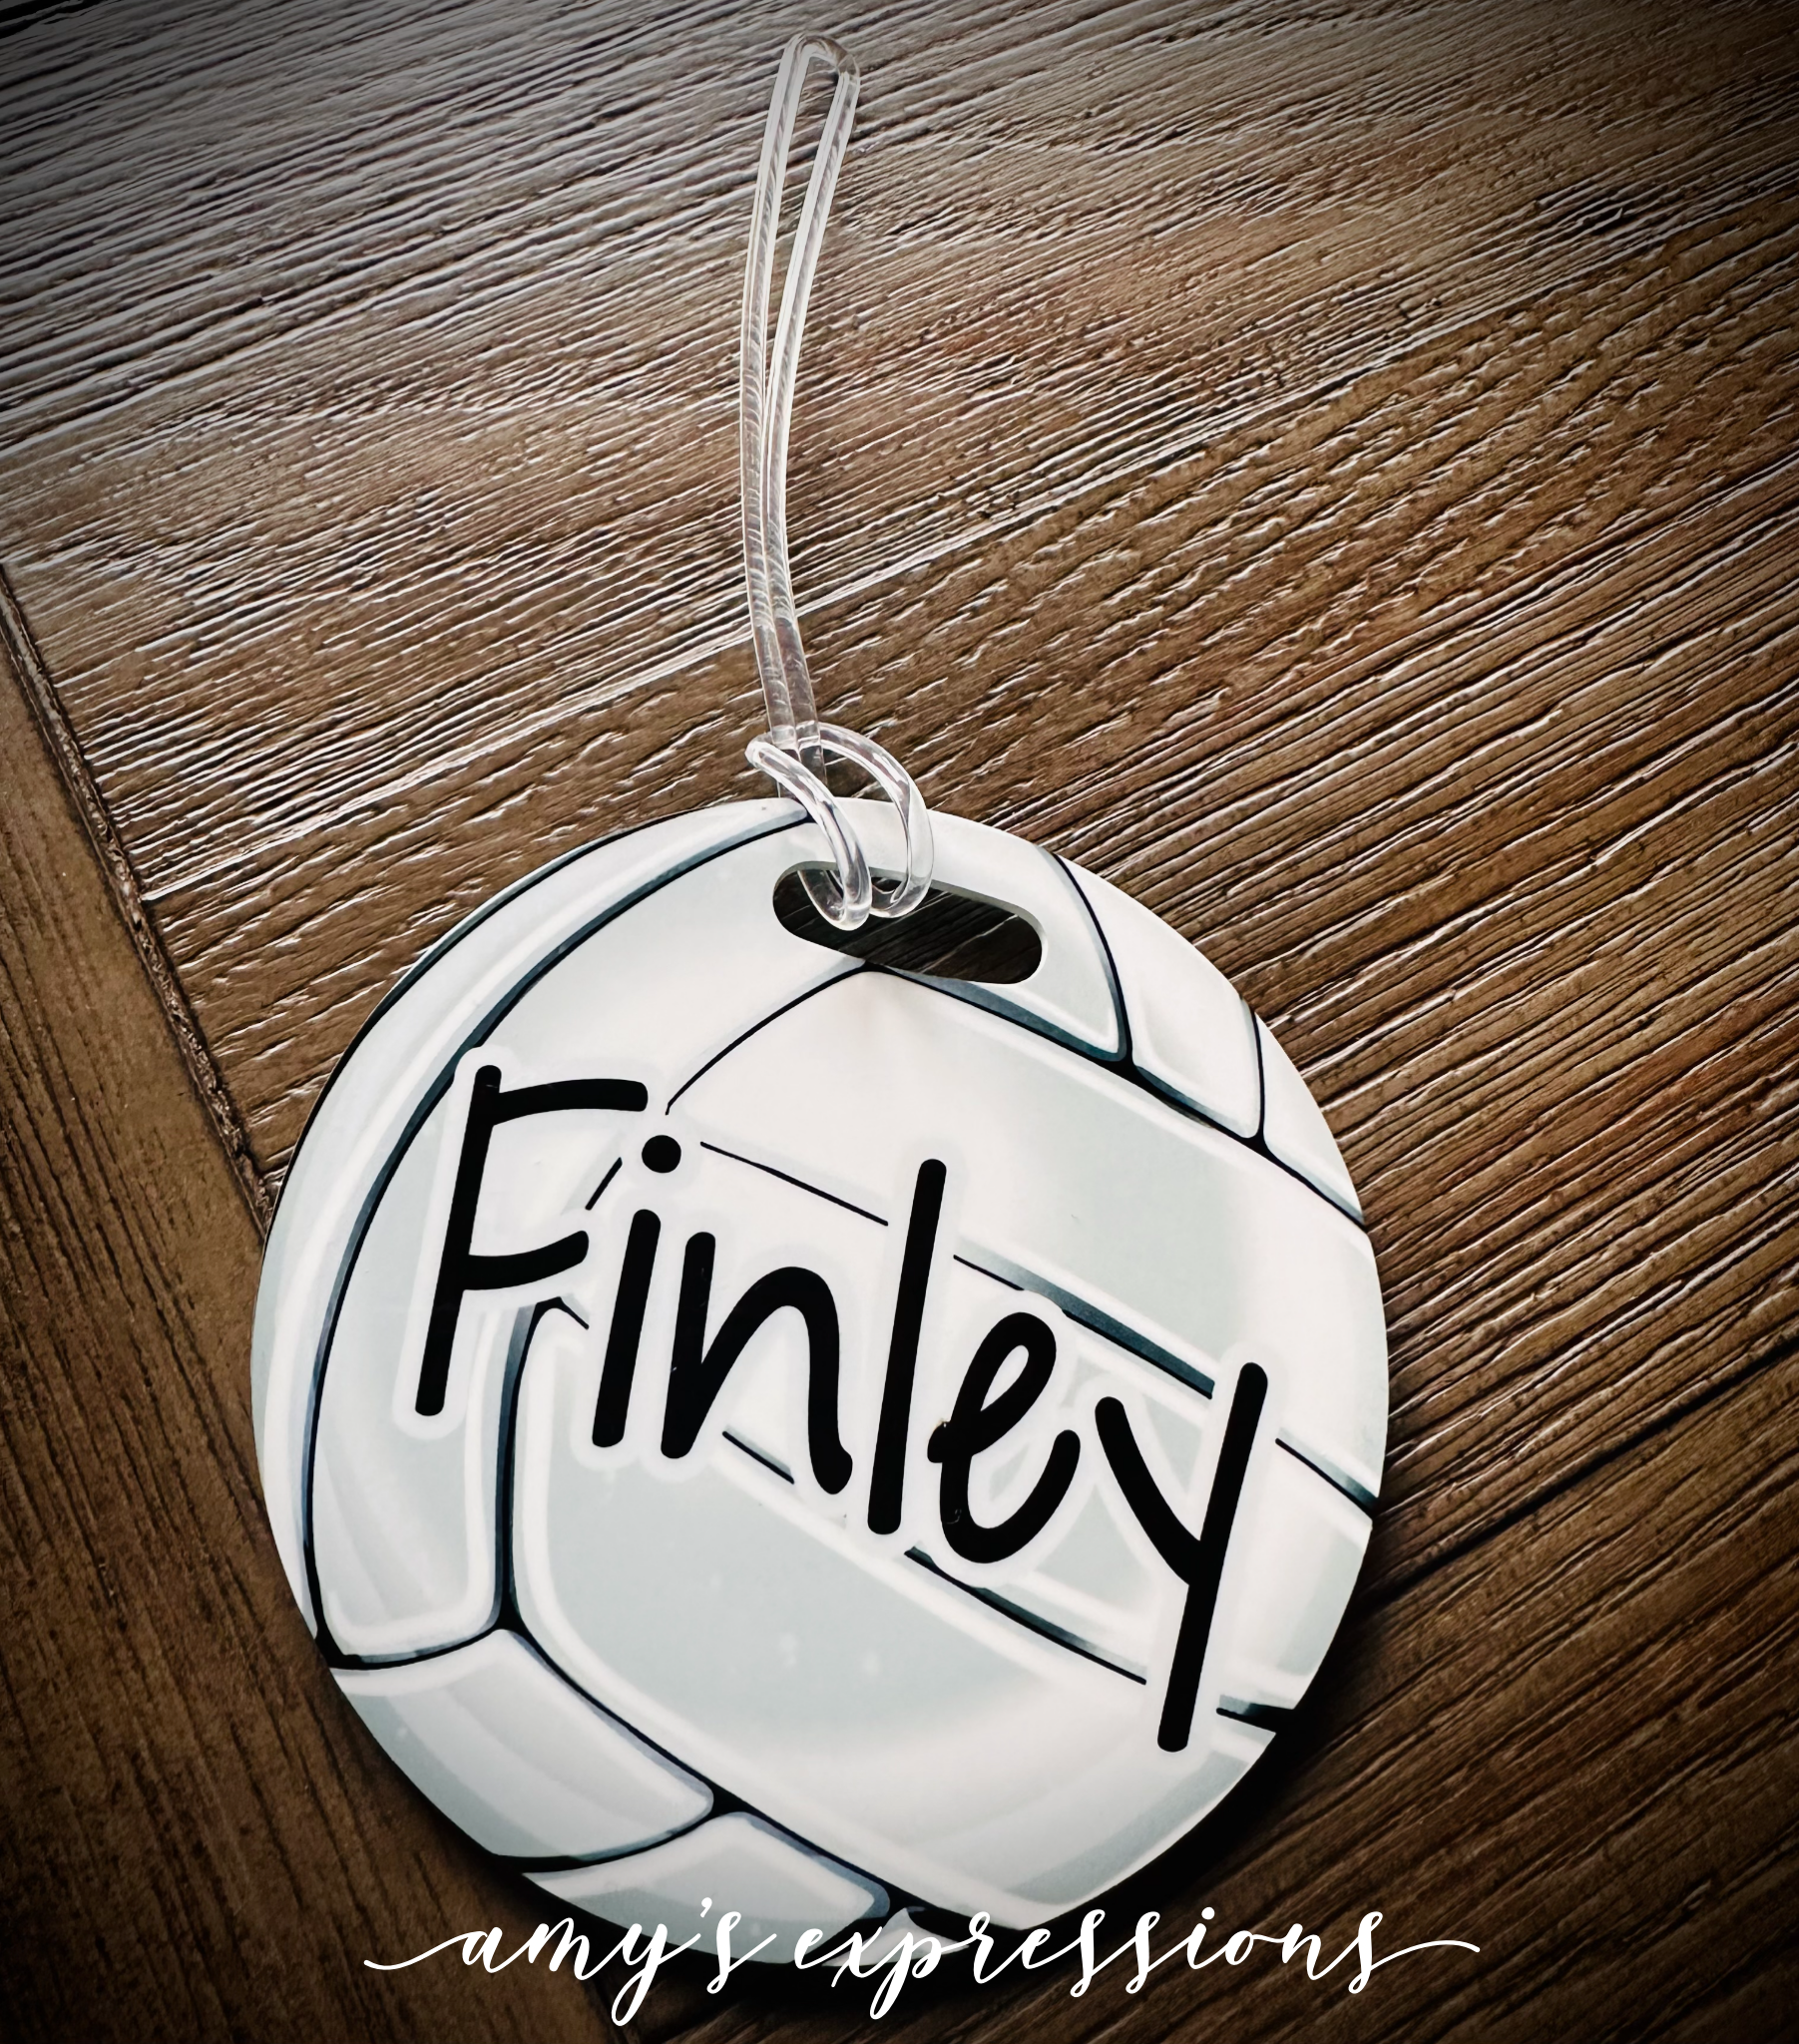 Volleyball bag tag